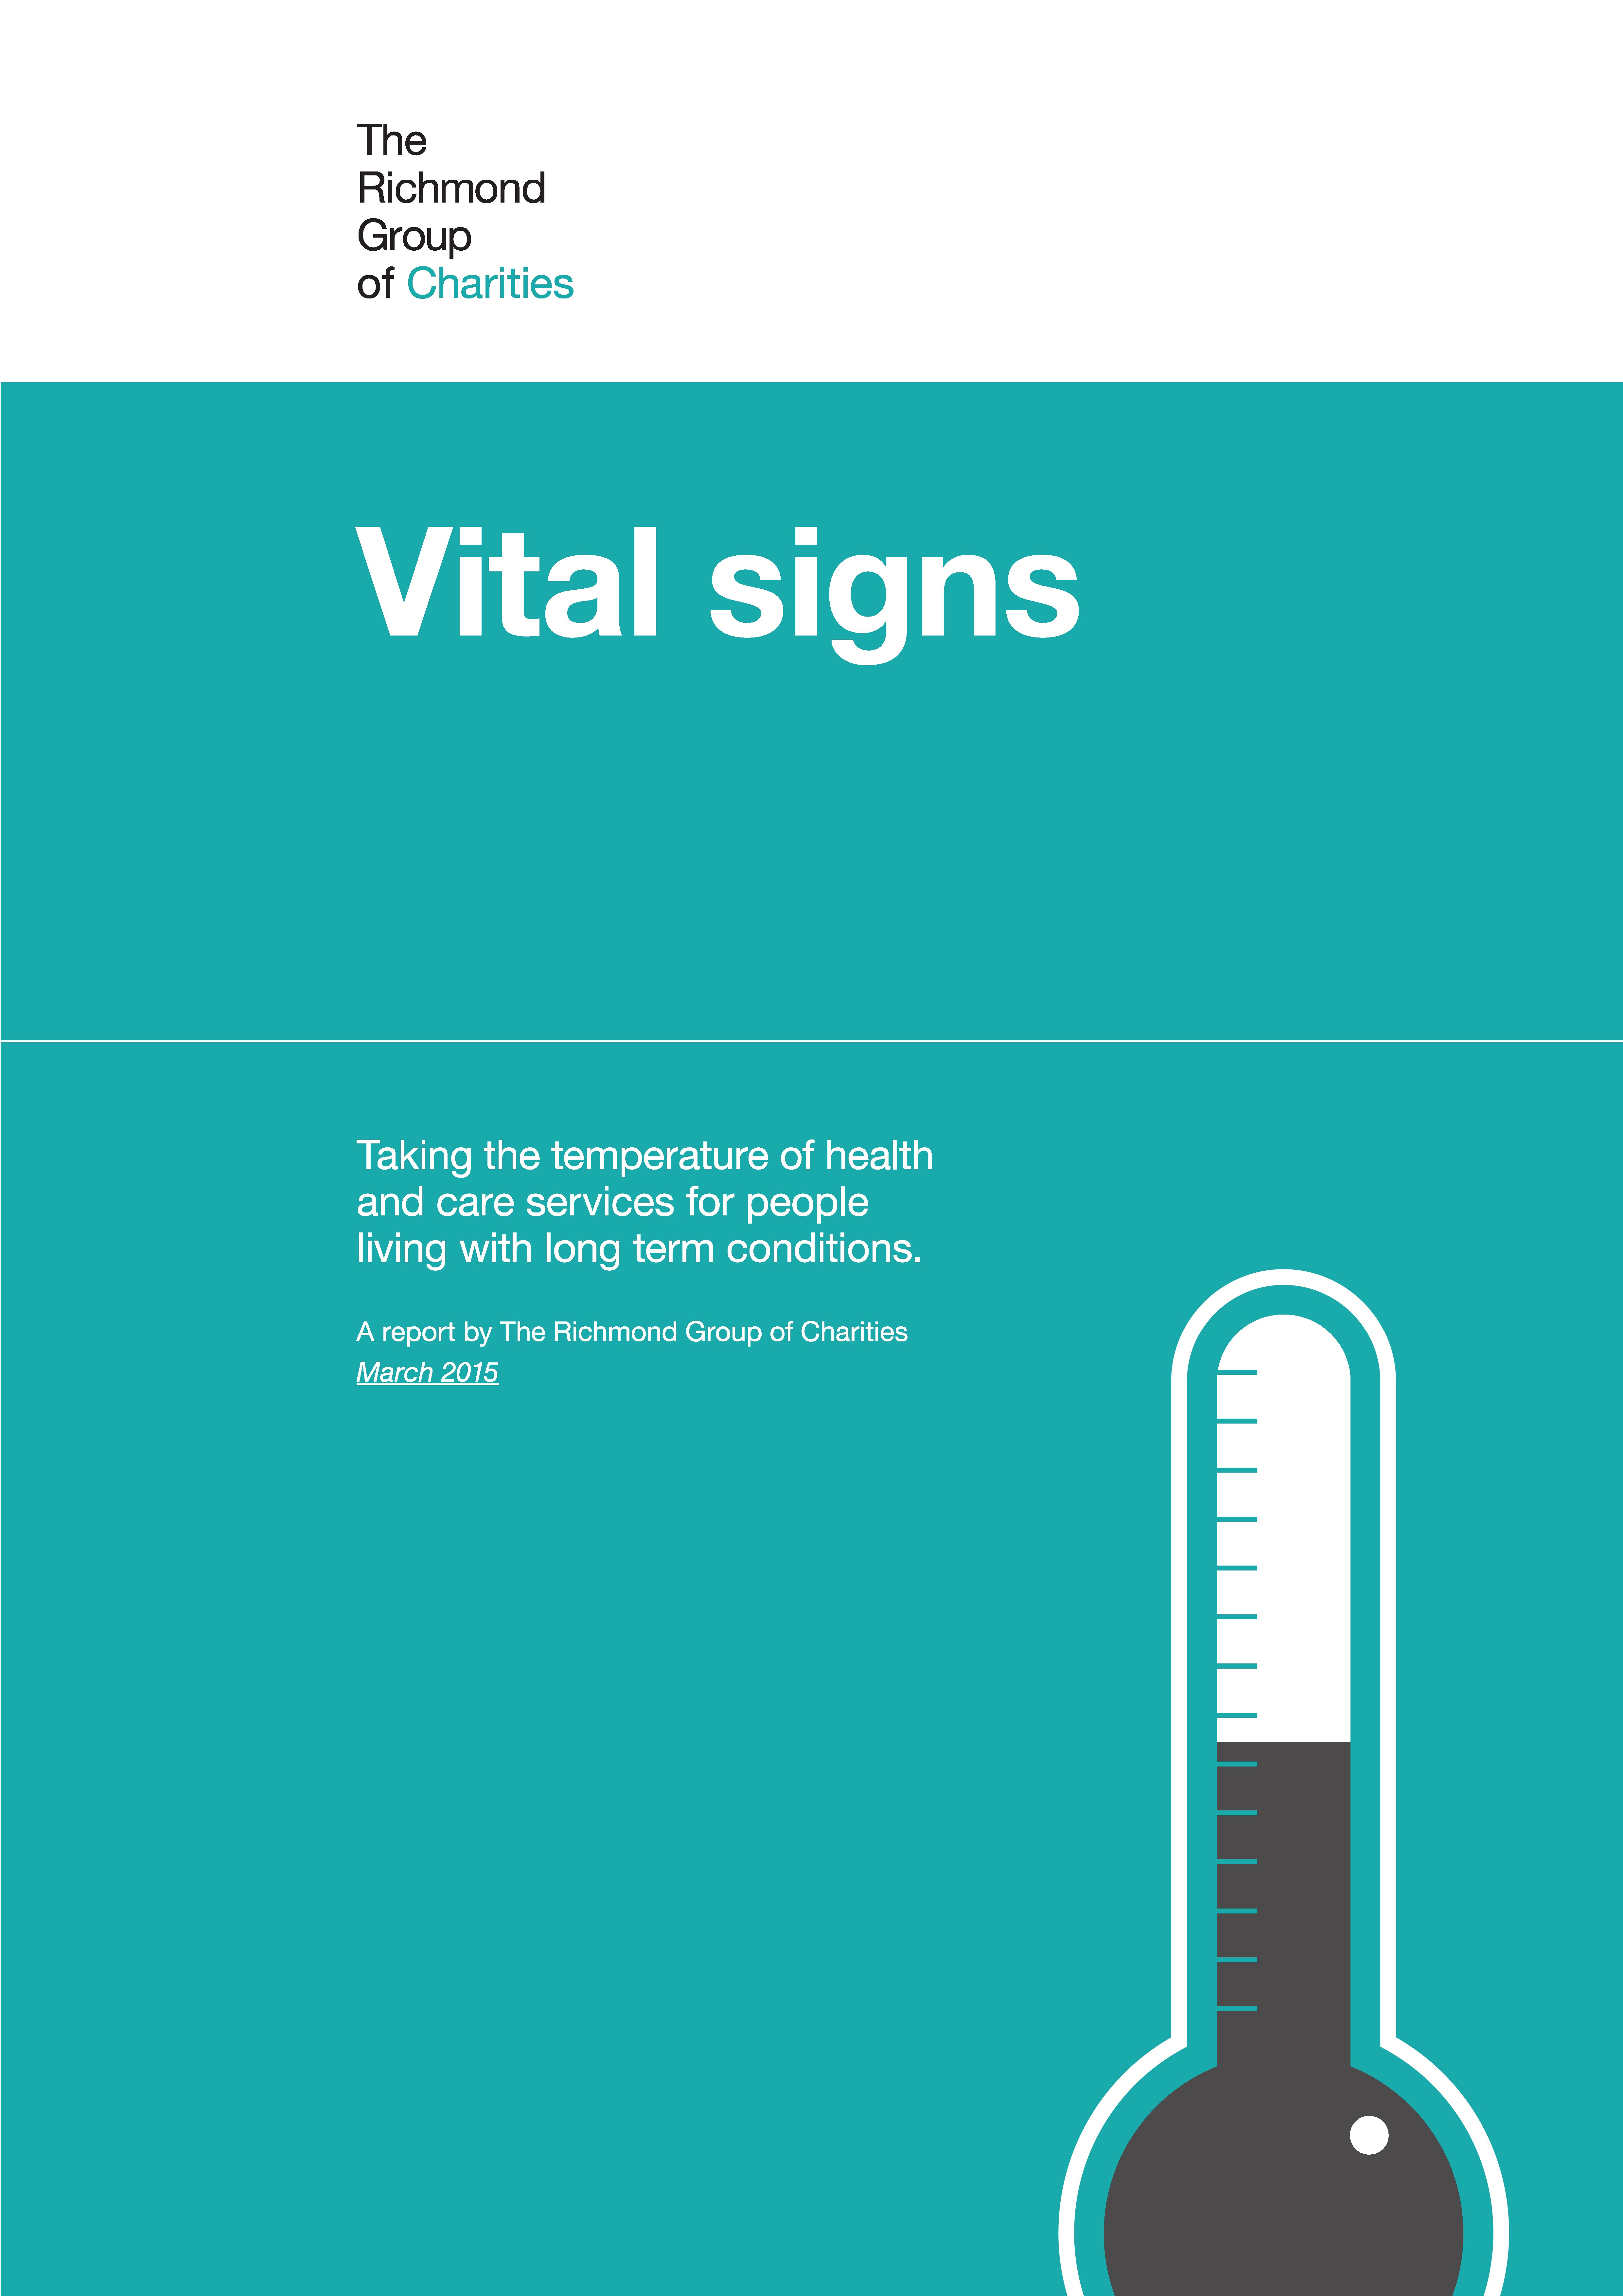 Vital signs: Taking the temperature of health and care services for people living with long term conditions